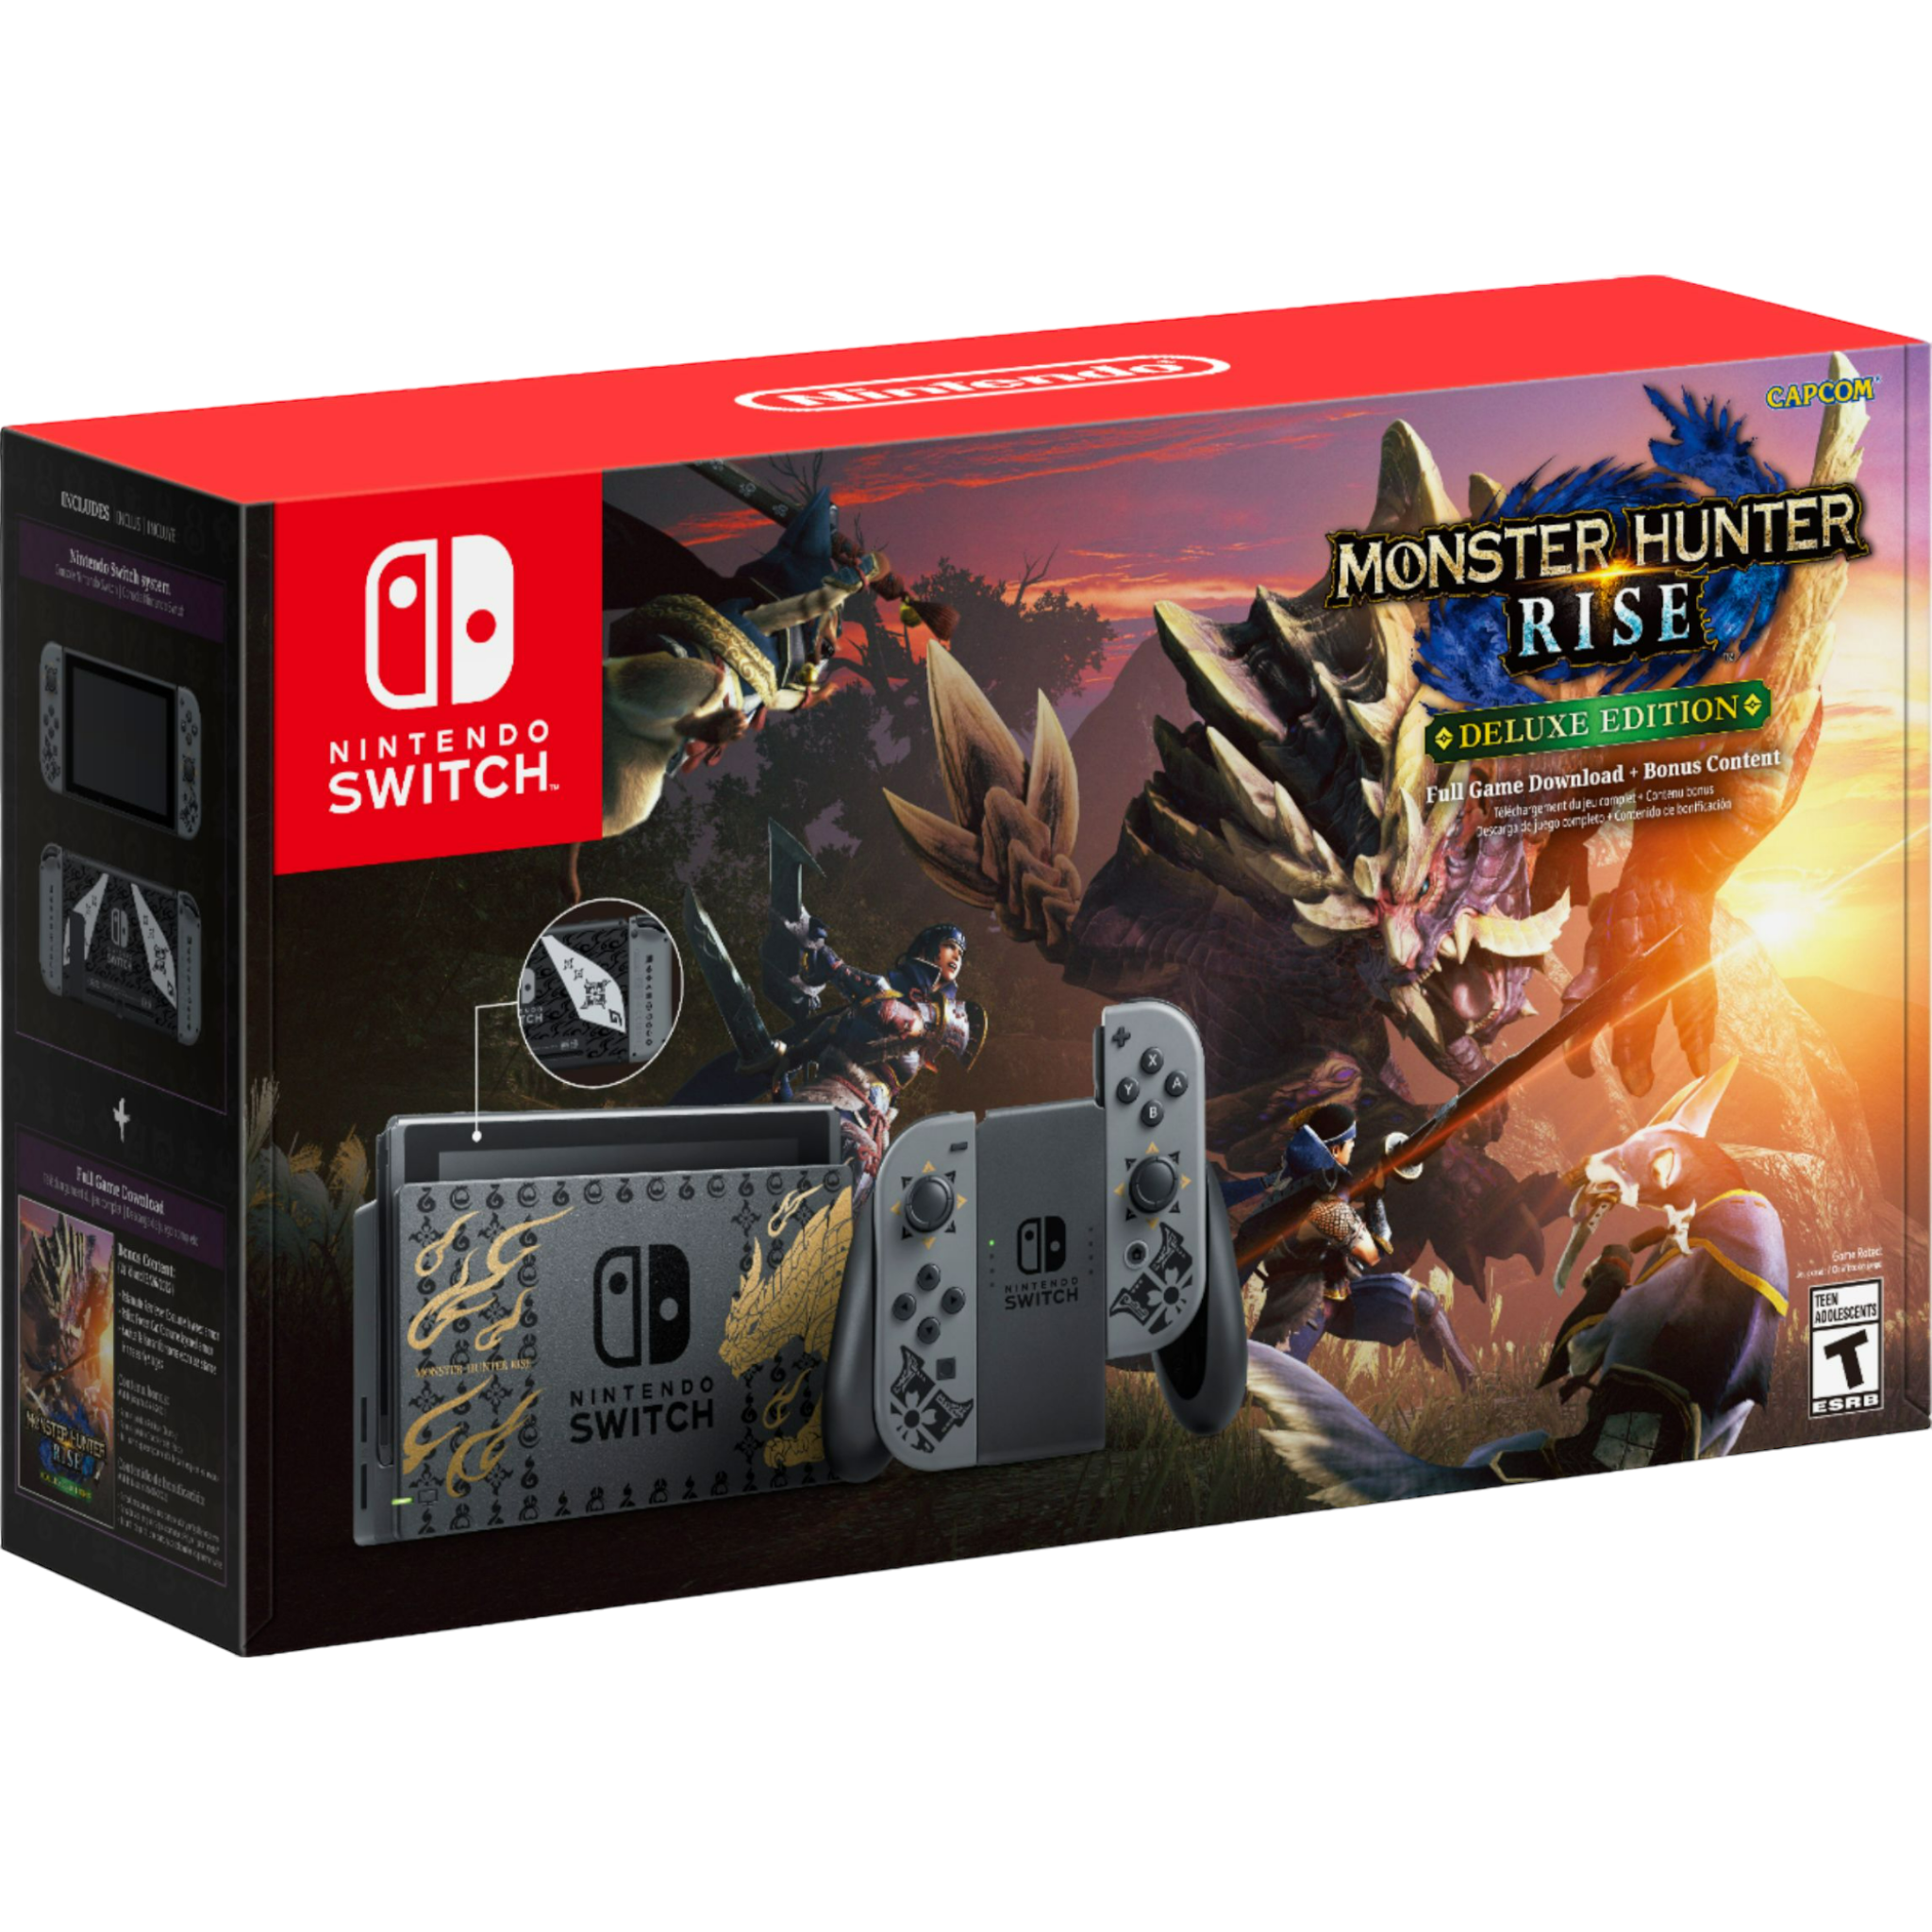 Nintendo Switch MONSTER HUNTER RISE Deluxe Edition System - Gray - Pro-Distributing